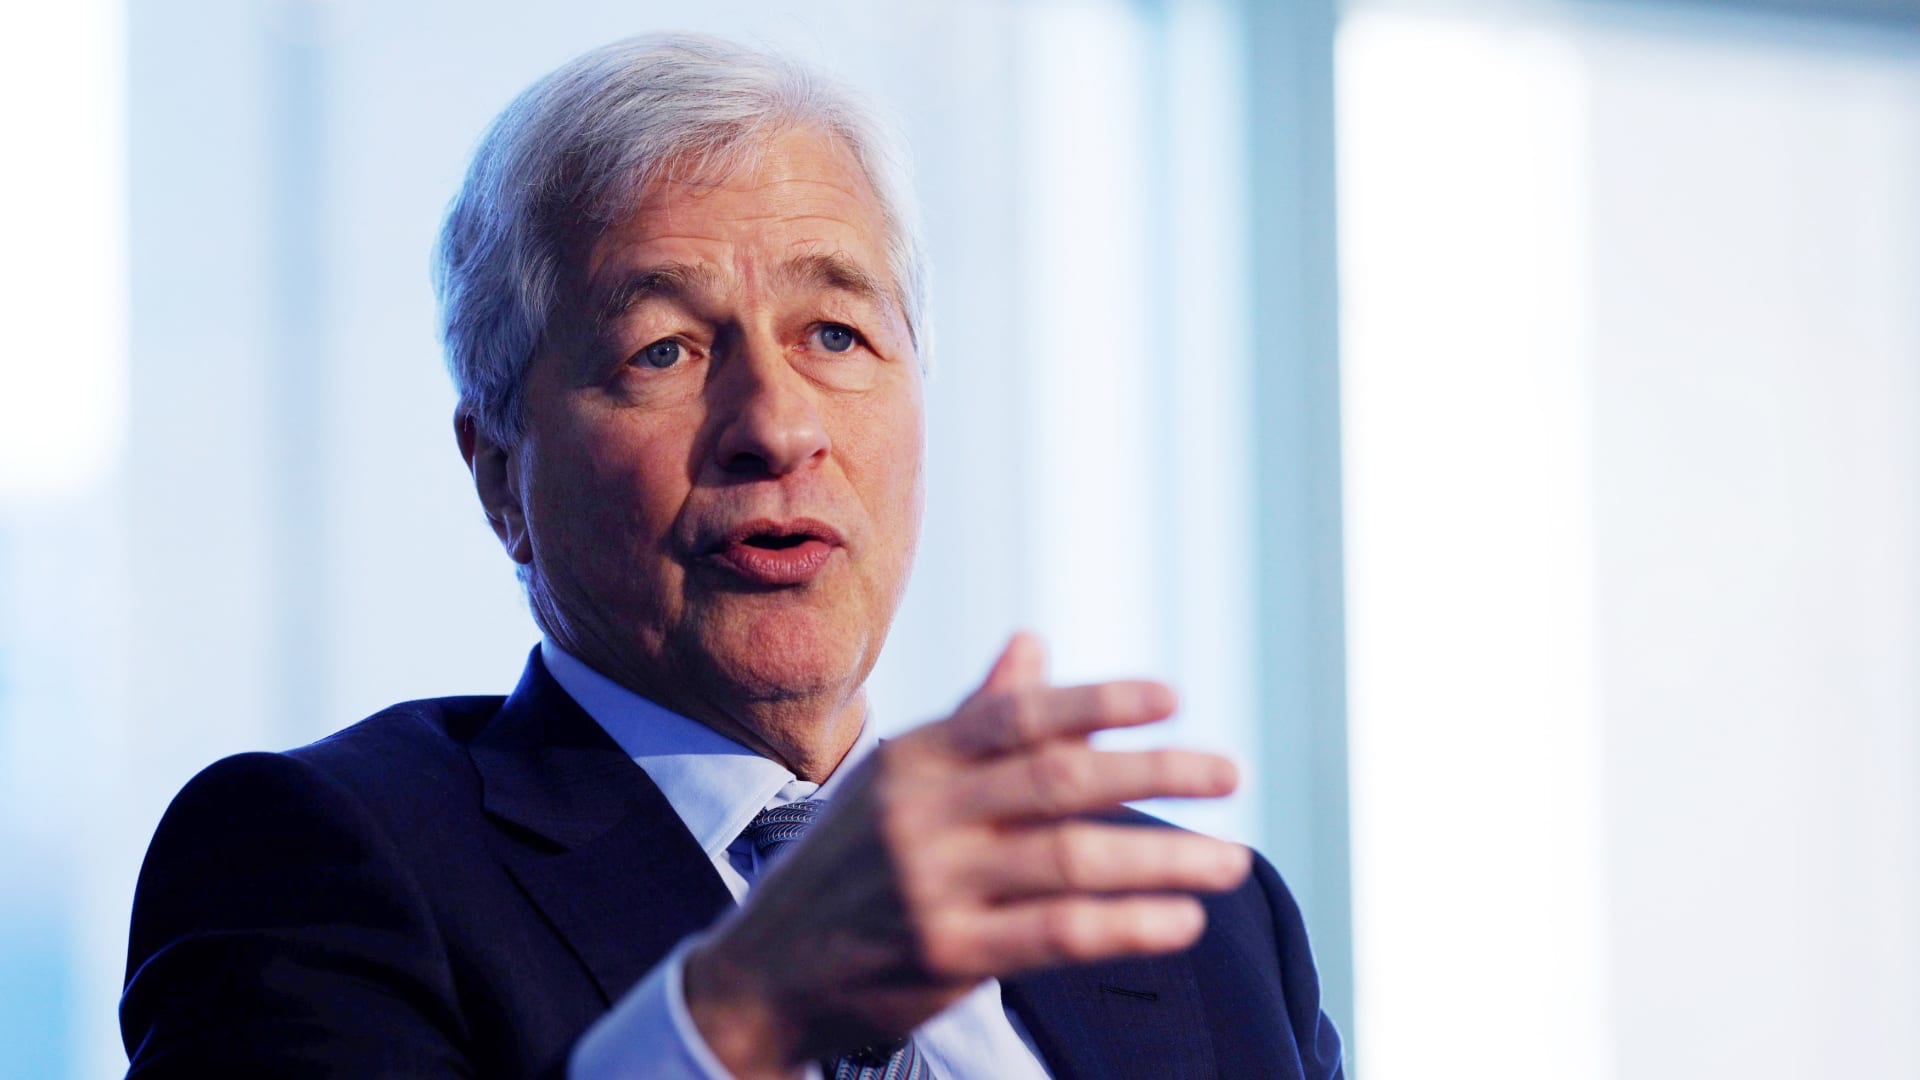 Jamie Dimon says Musk should 'clean up Twitter,' echoes Tesla CEO's bot concerns